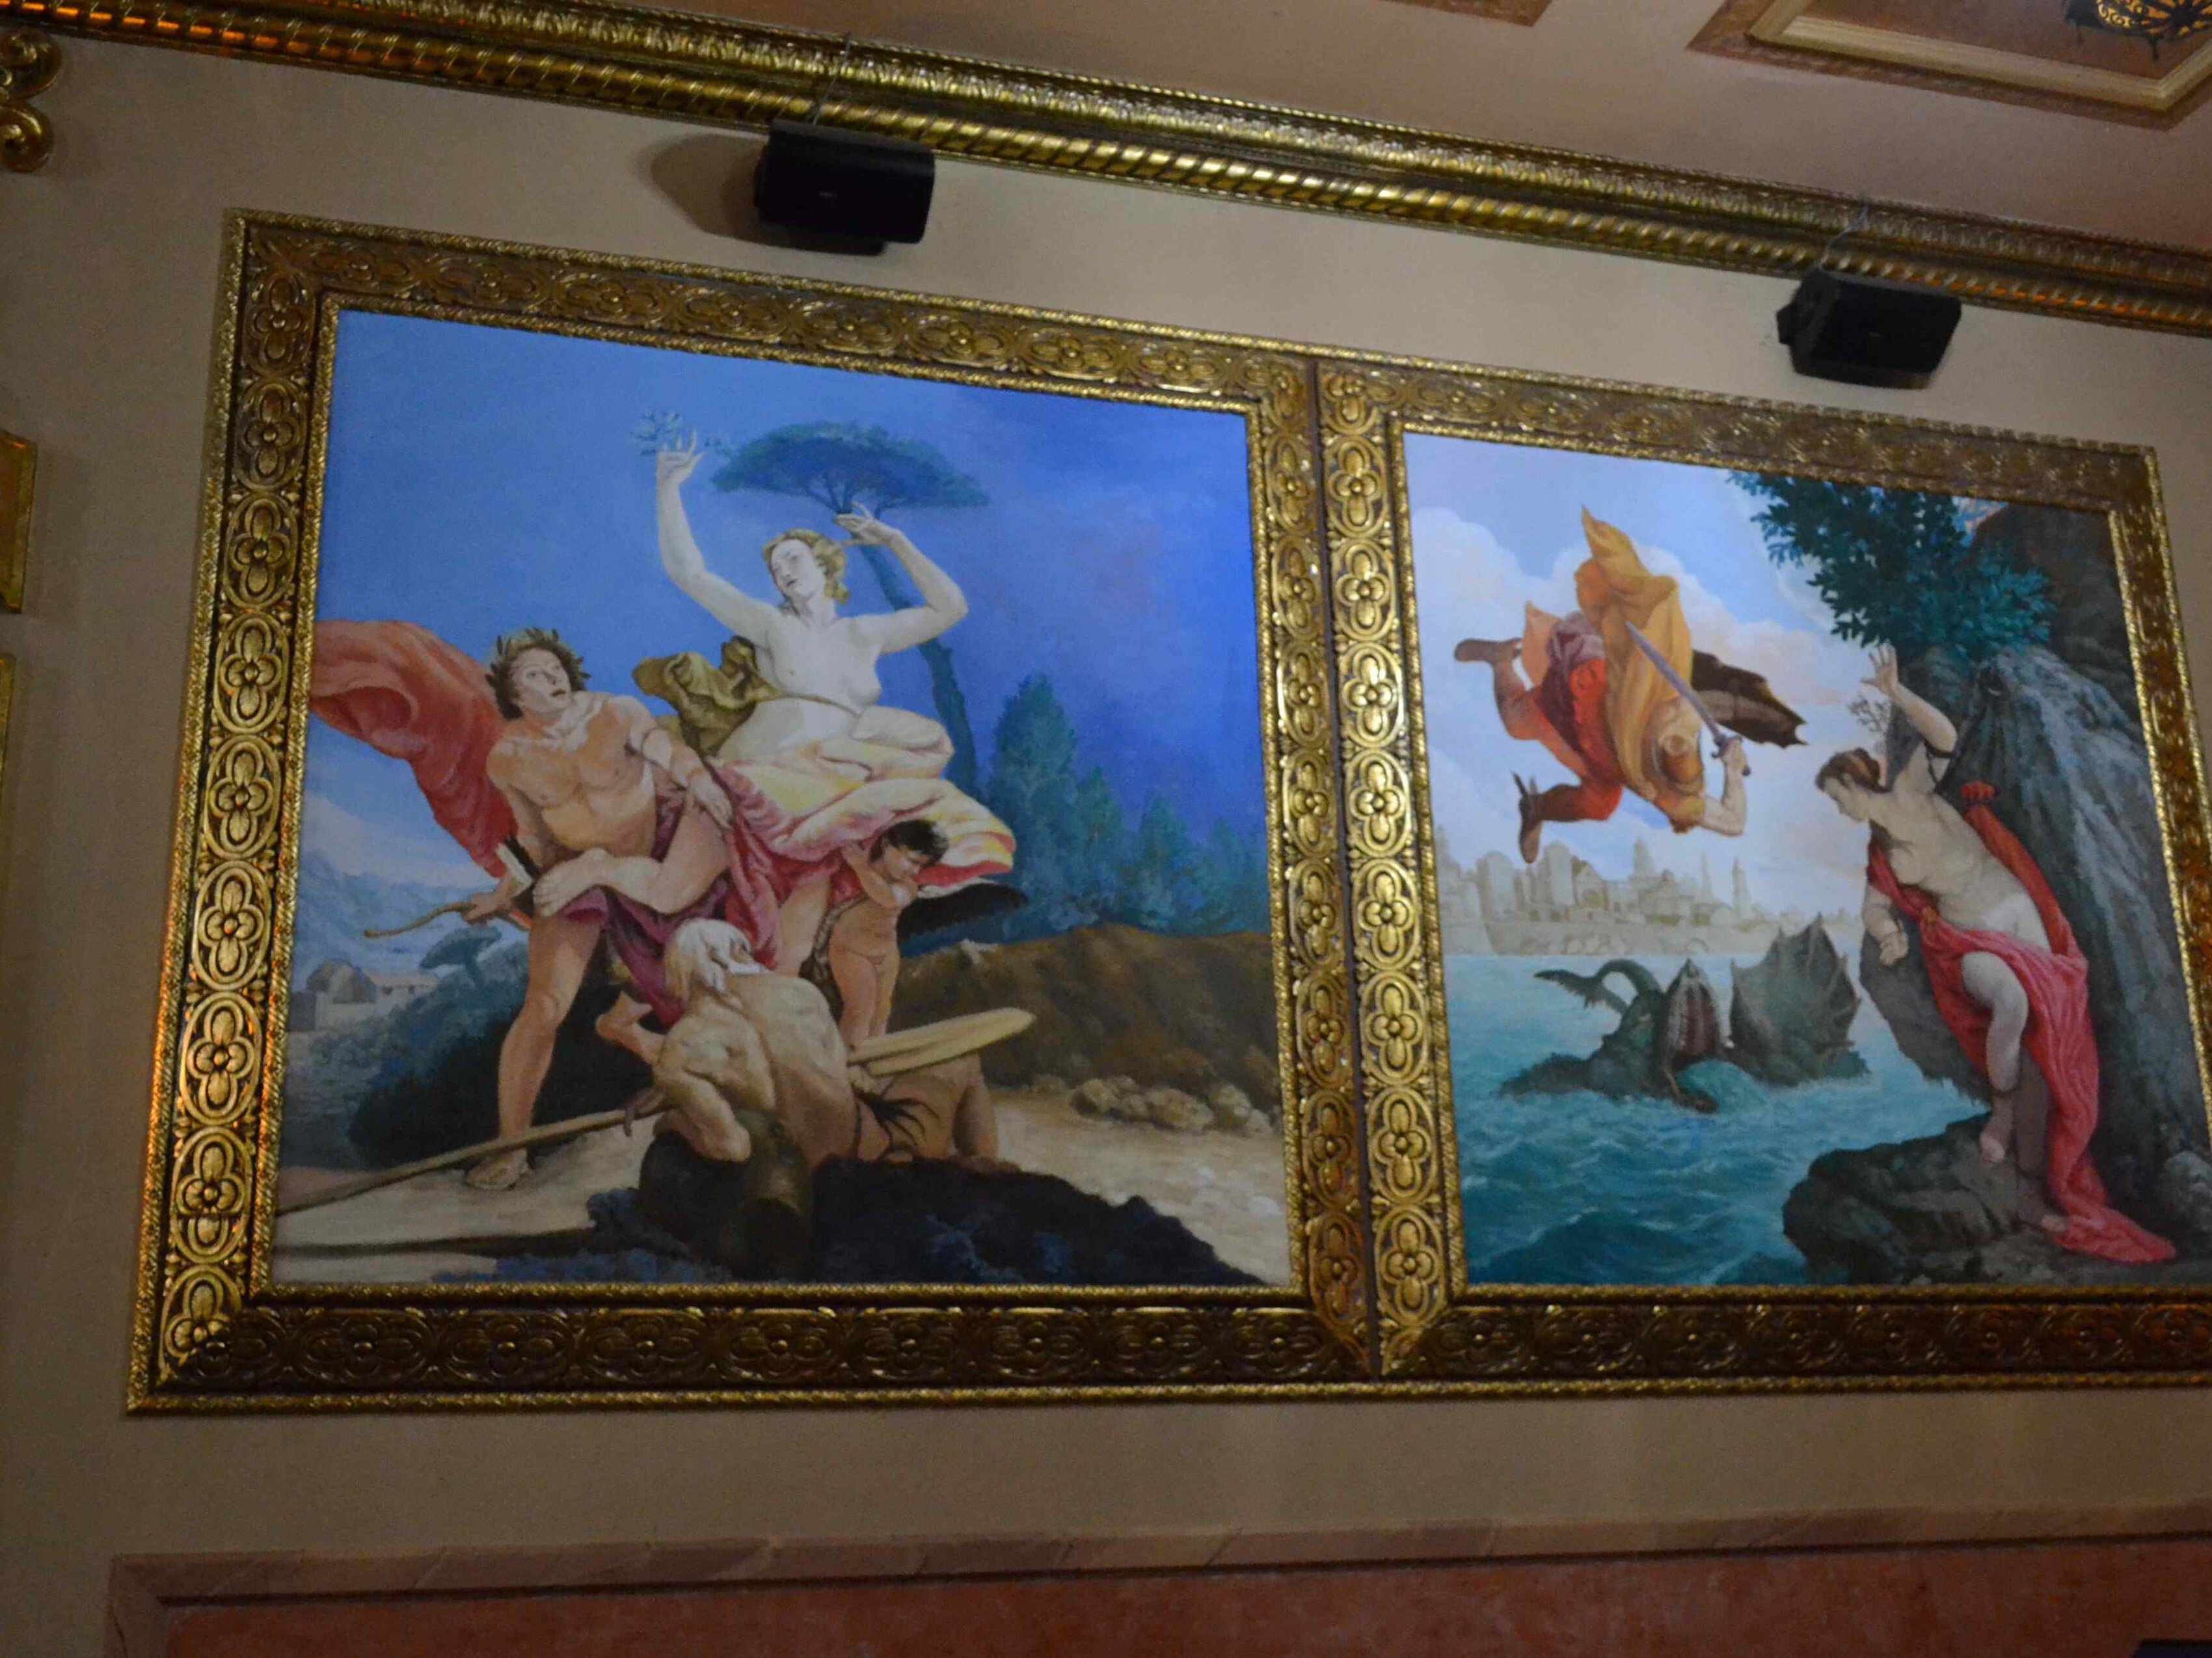 The Greek mythology paintings the theater has become known for. 